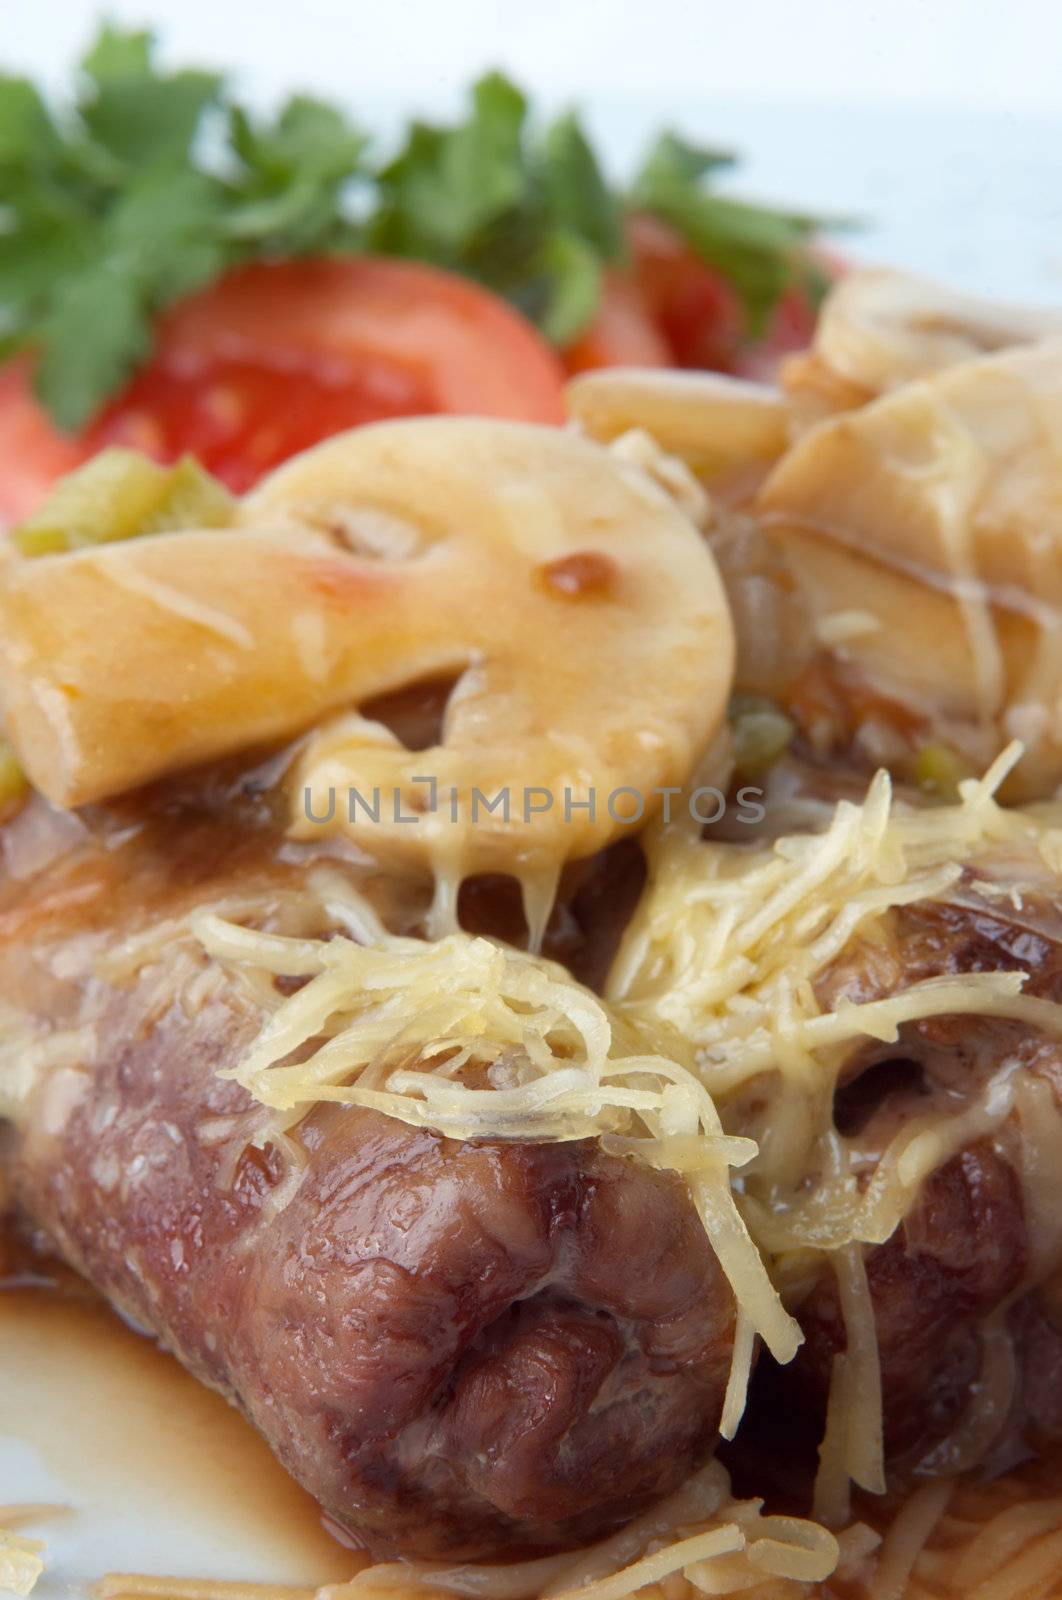 grilled meat rolls with mushrooms, melted cheese and vegetable garnish